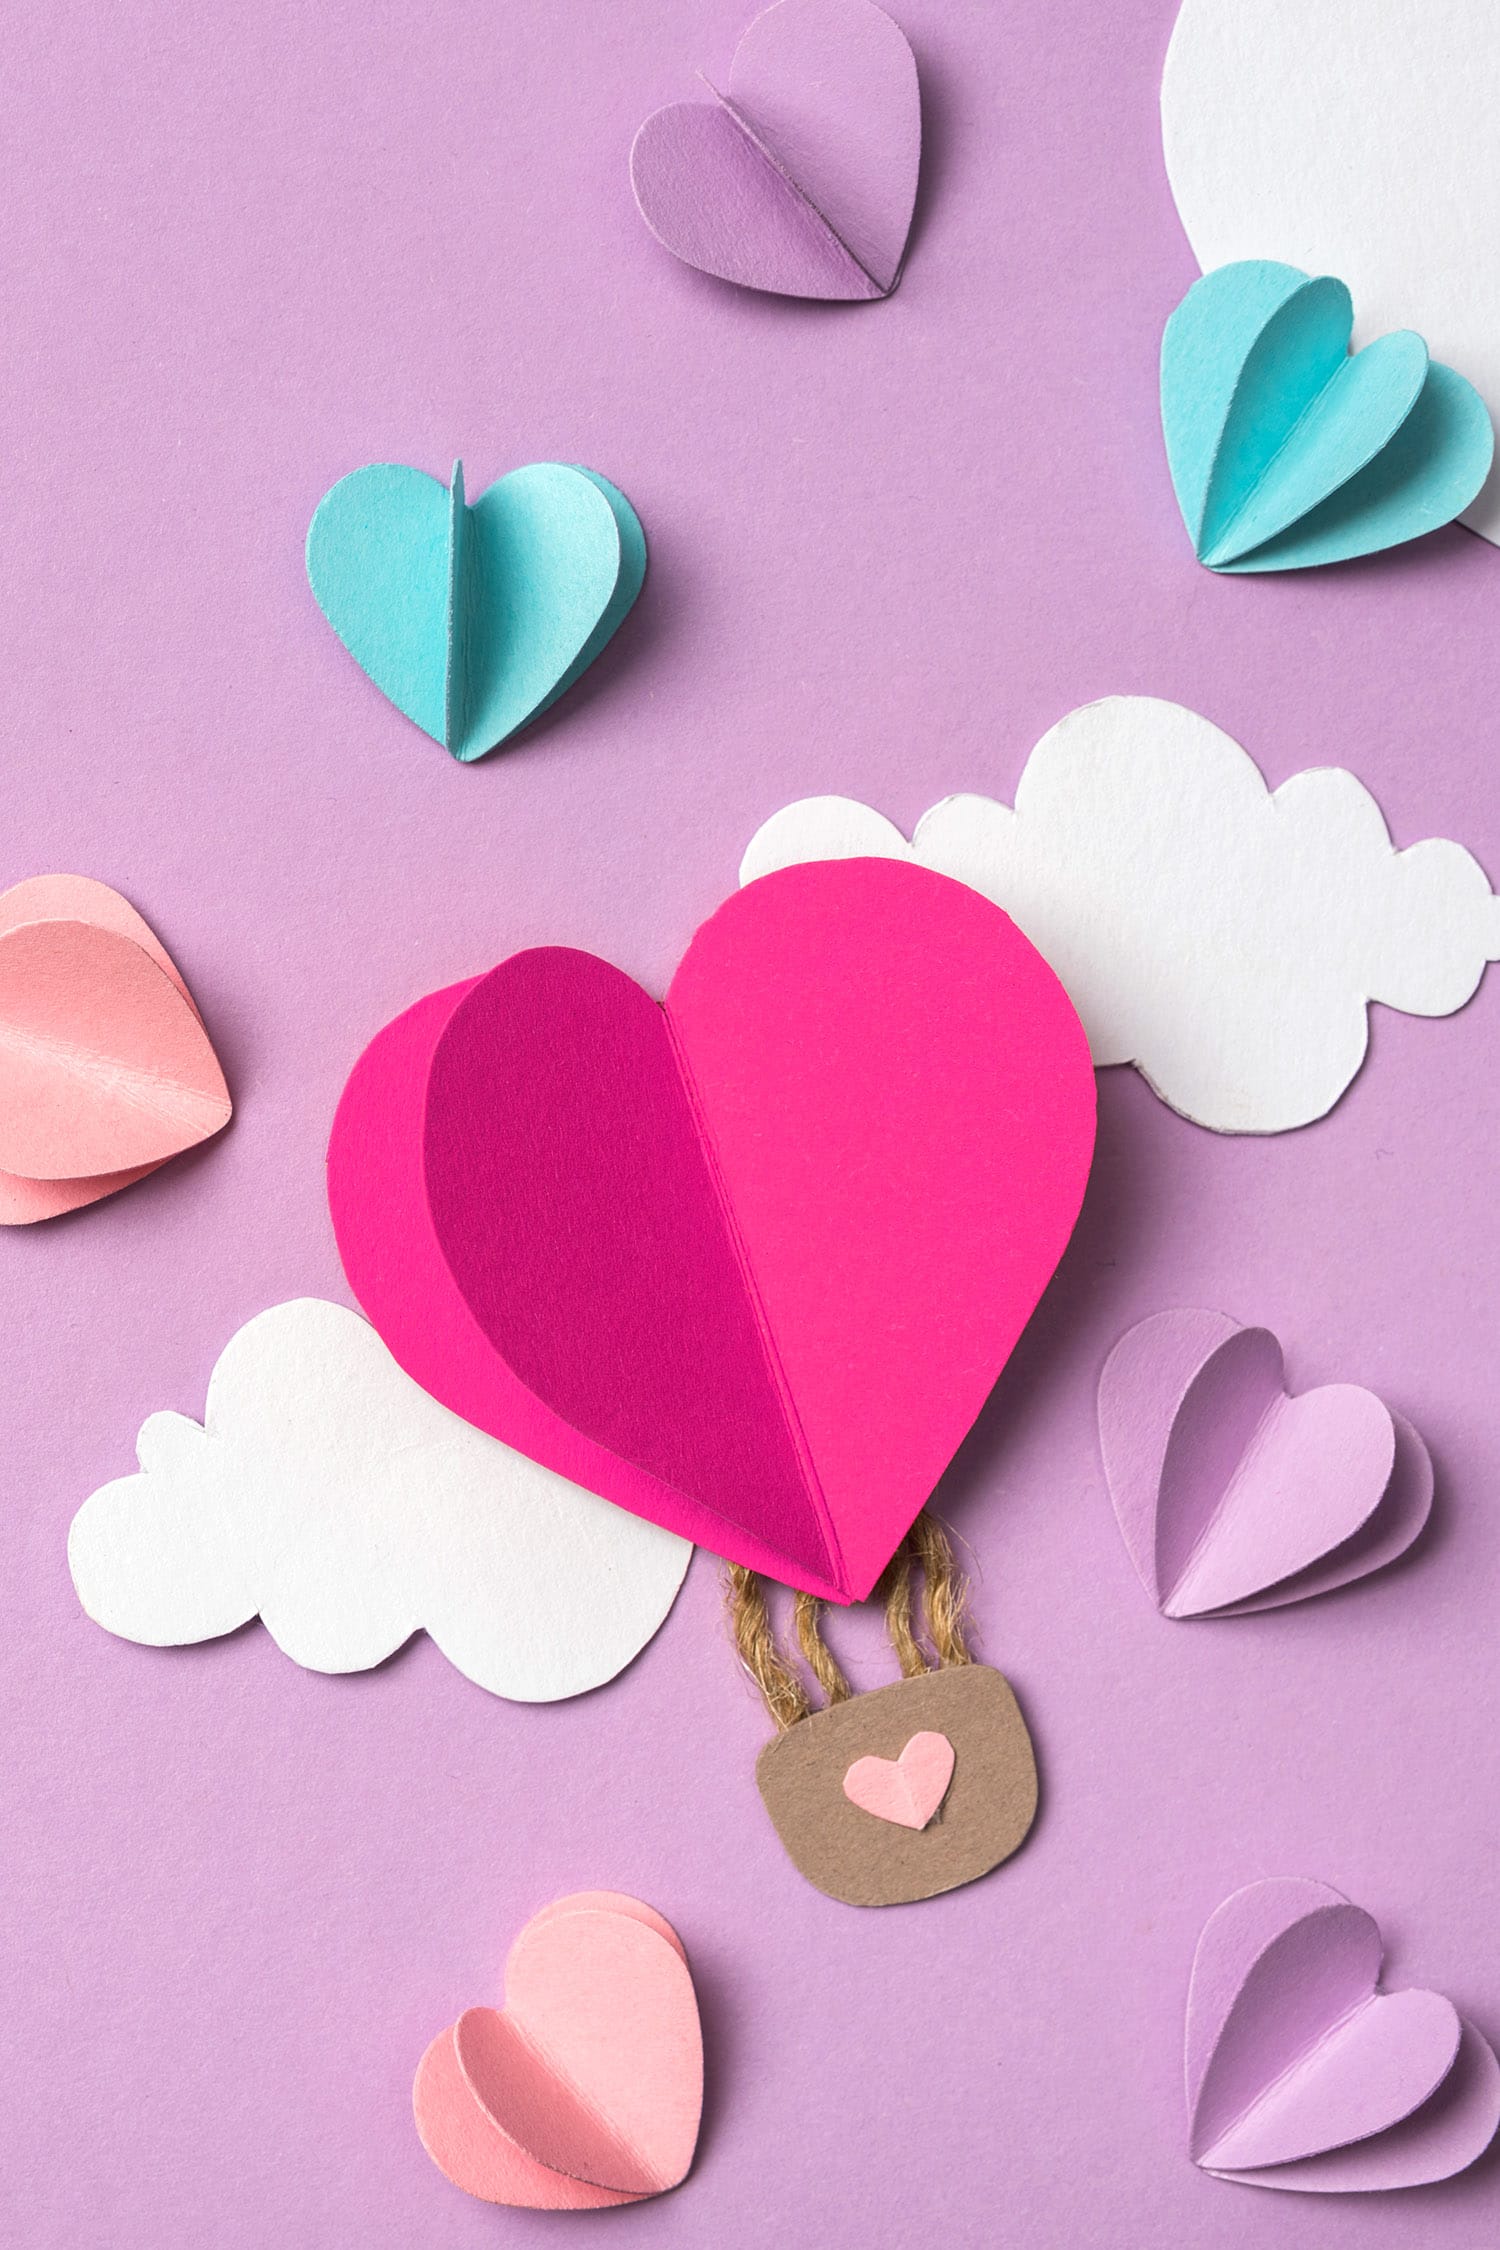 Printable Heart Template & Heart Crafts